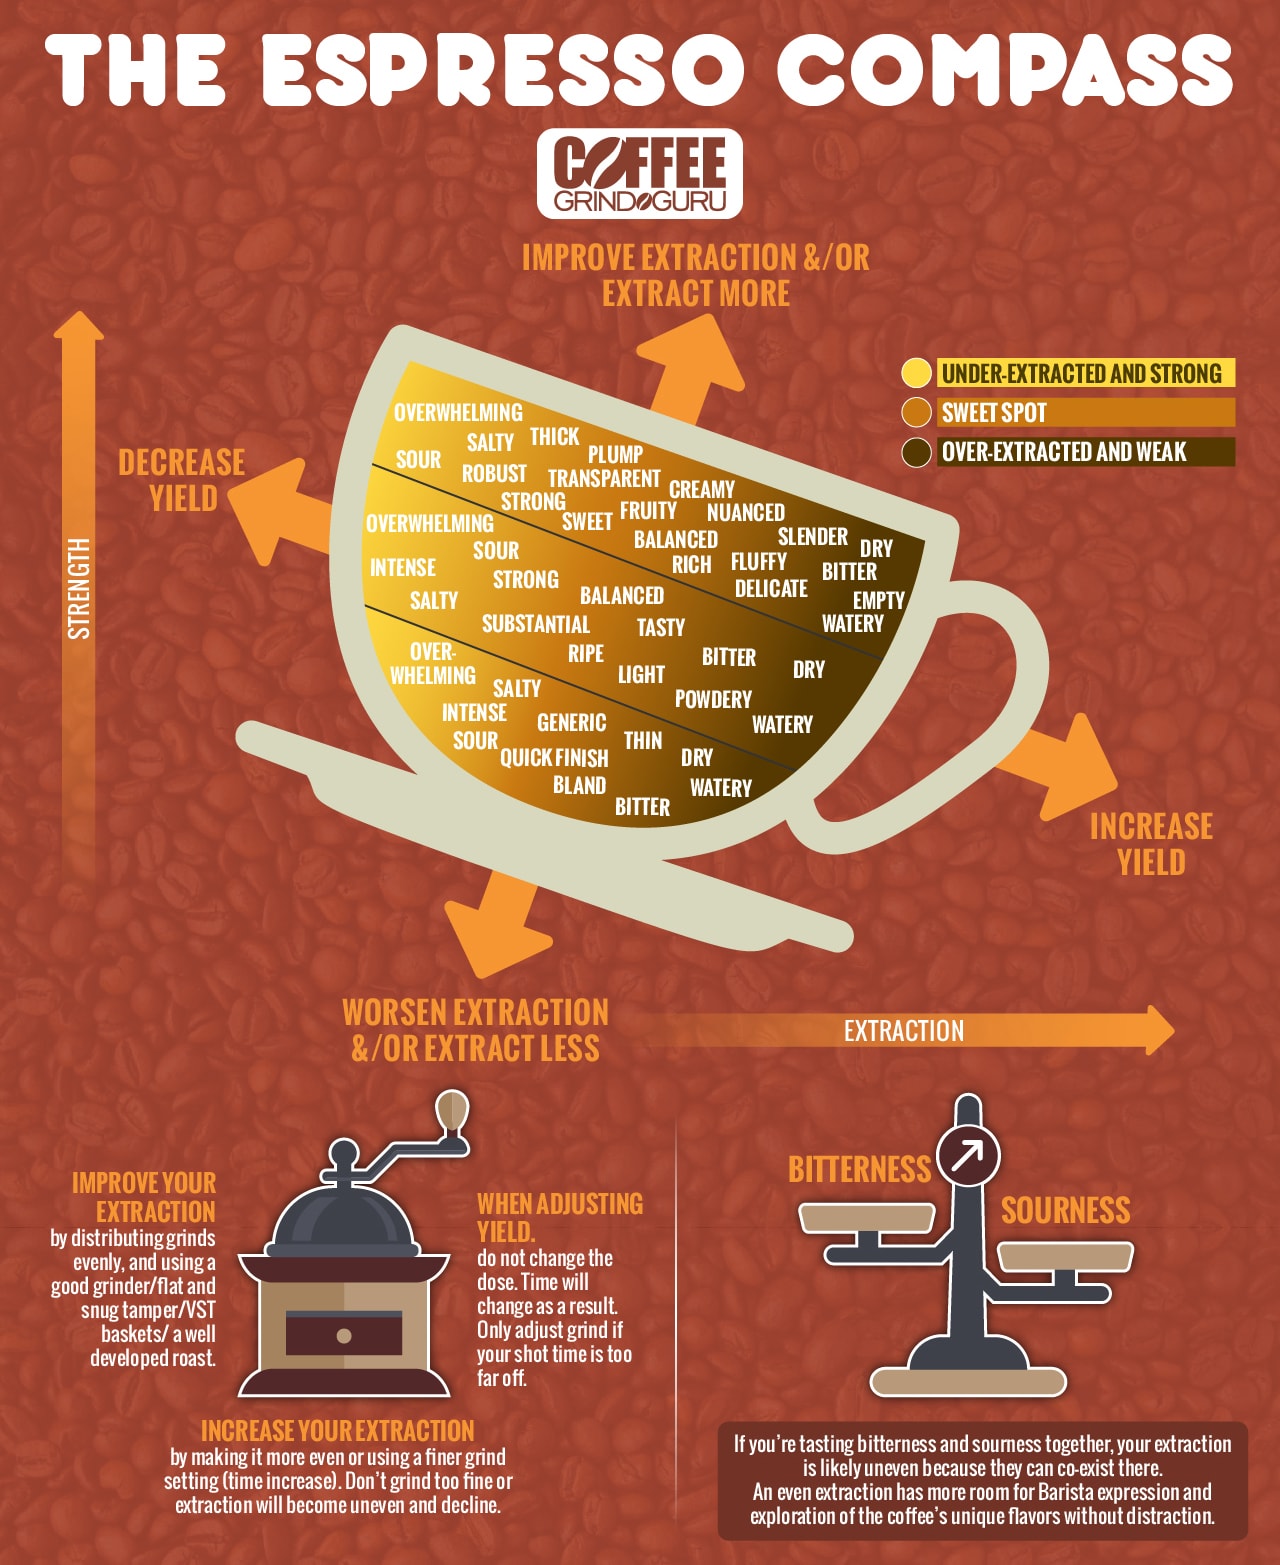 The CoffeeGrindGuru Espresso Compass. A free infographic that helps anyone create better espresso drinks.